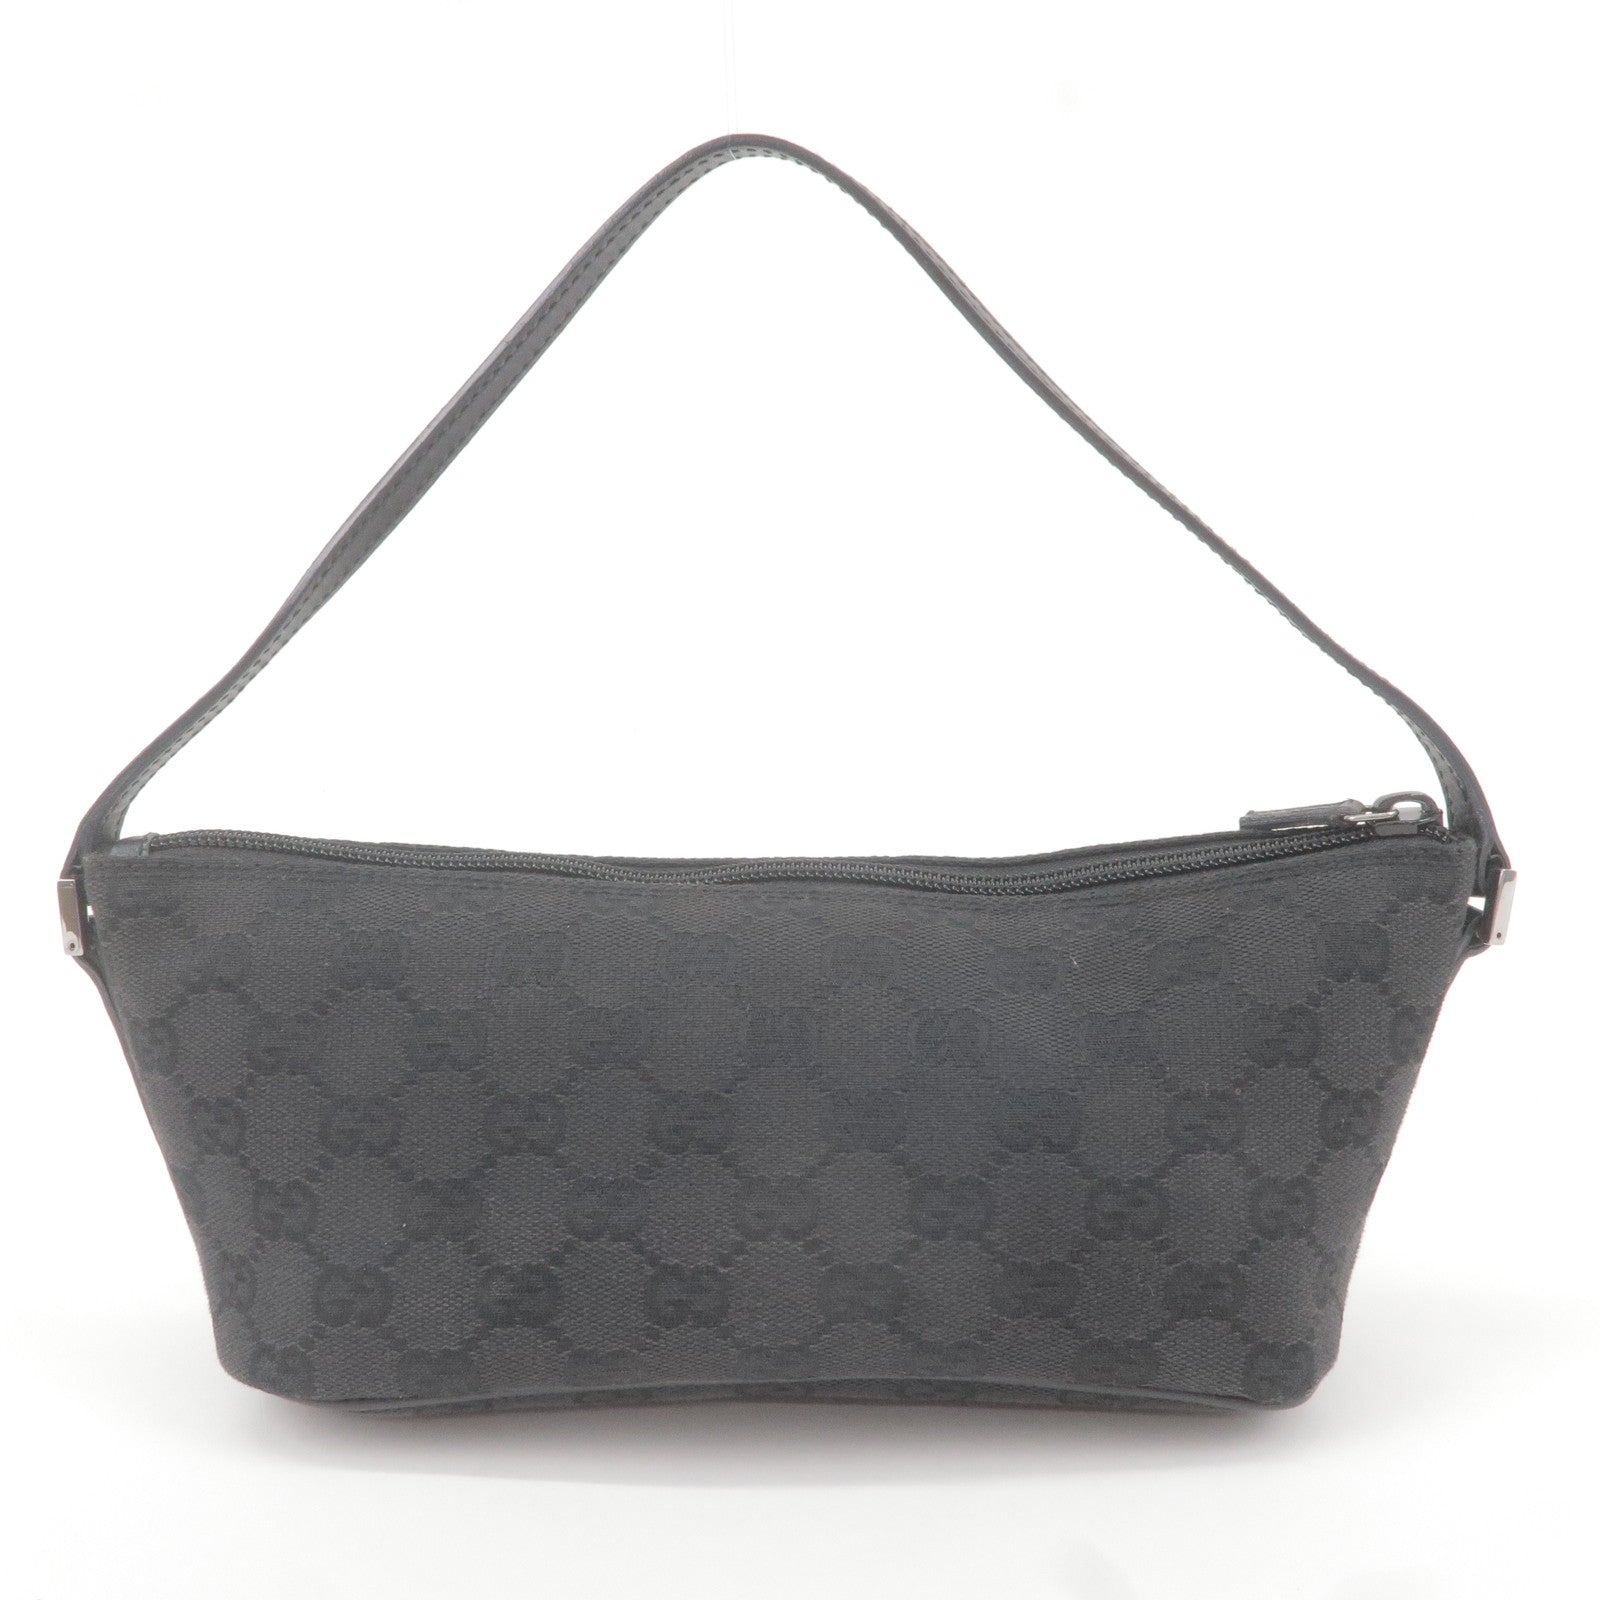 GUCCI-Boat-Bag-GG-Canvas-Leather-Hand-Bag-Pouch-Black-07198 – dct